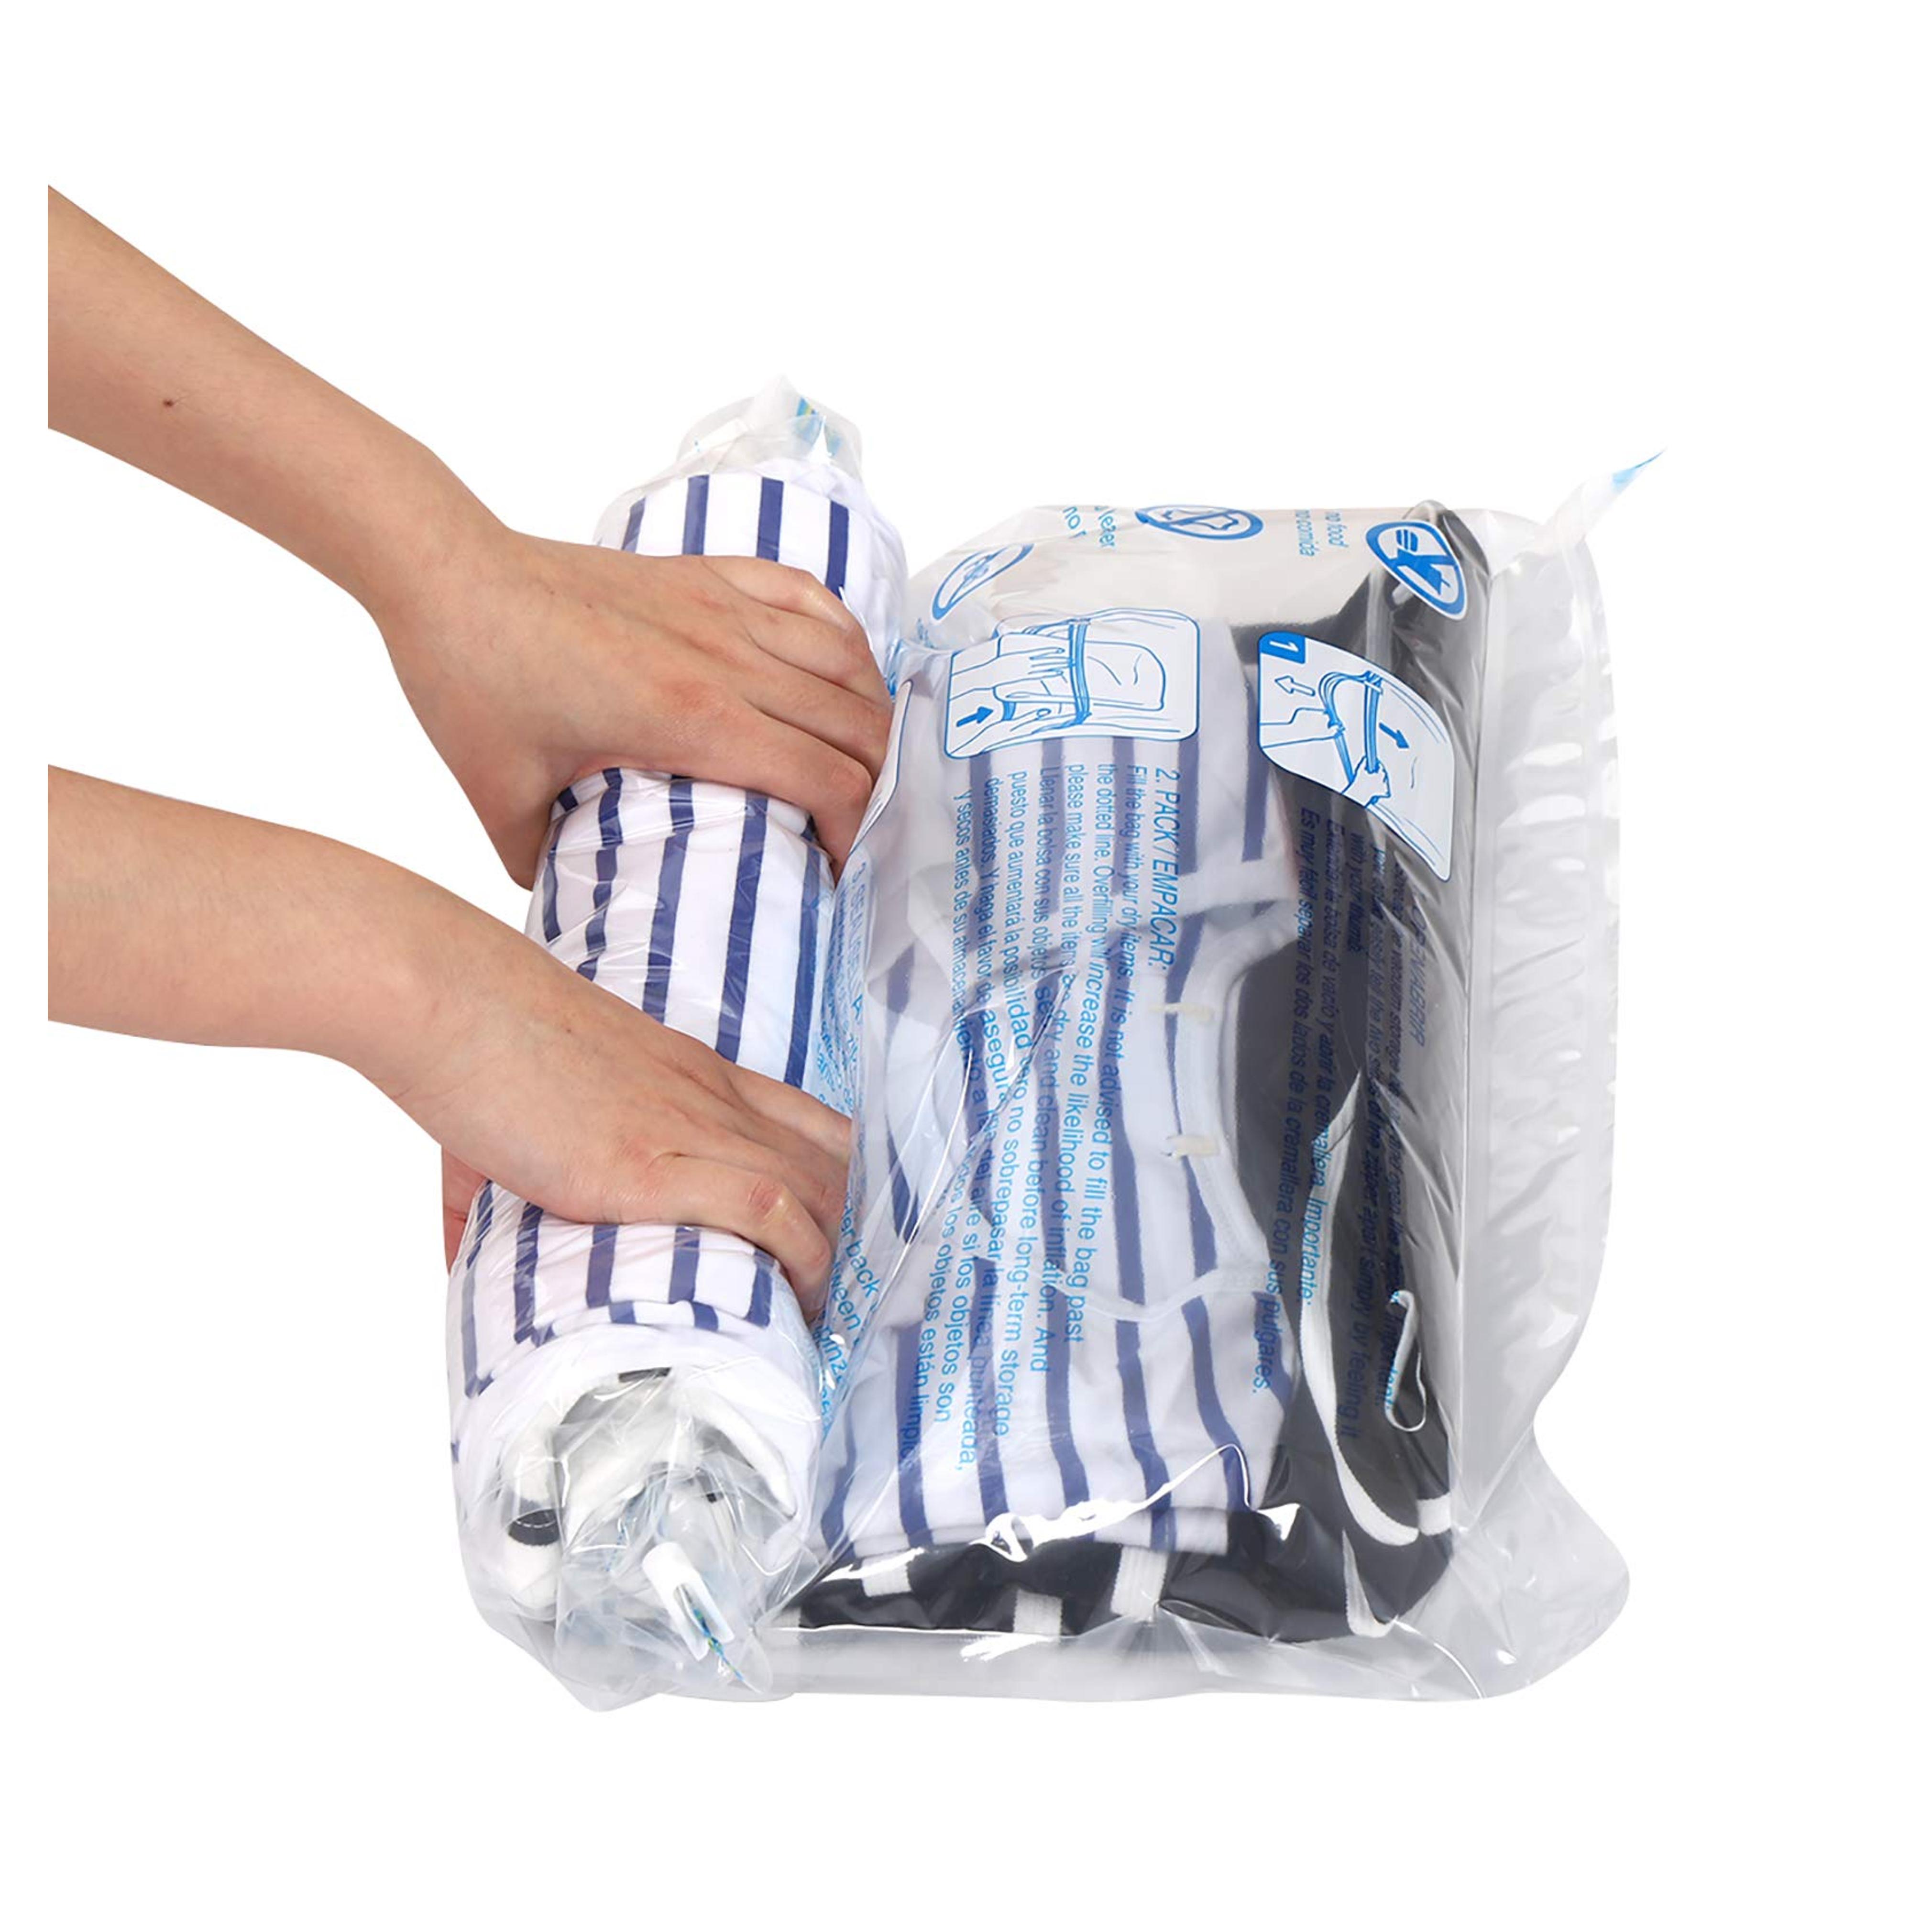 Amazon.com: 12 Compression Bags for Travel, Travel Essentials Compression Bags, Vacuum Packing Space Saver Bags for Cruise Travel Accessories (12-Travel) : Home & Kitchen